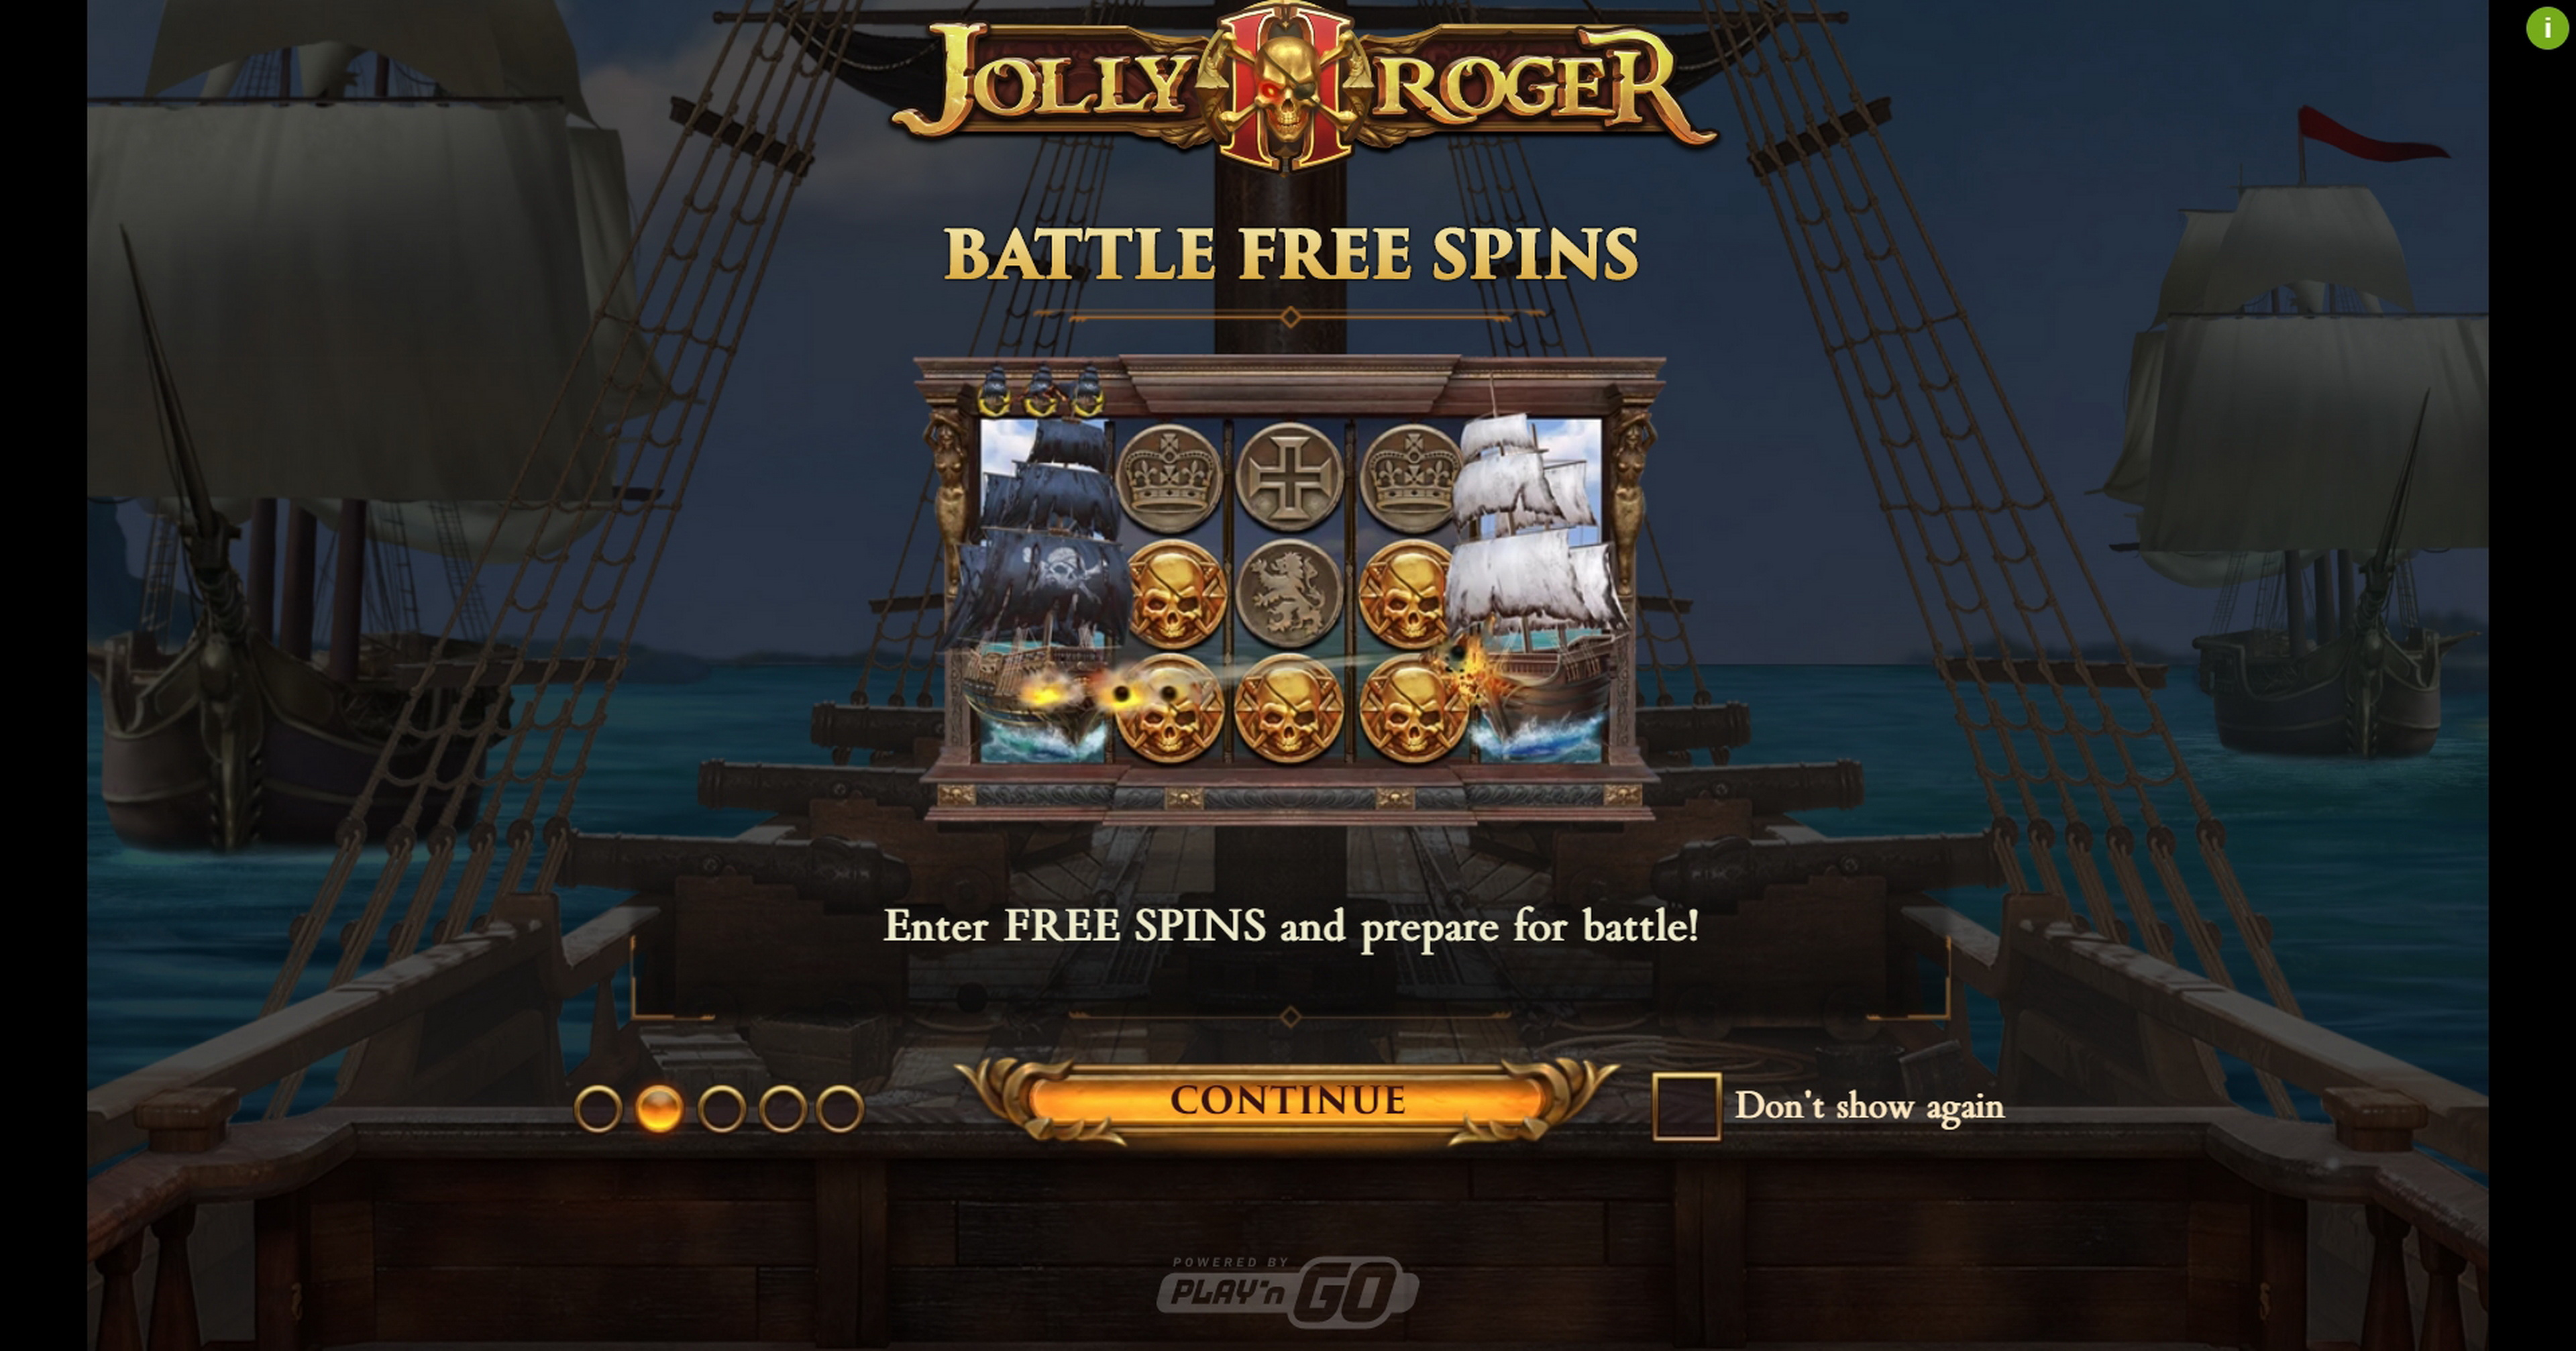 Play Jolly Roger 2 Free Casino Slot Game by Playn GO